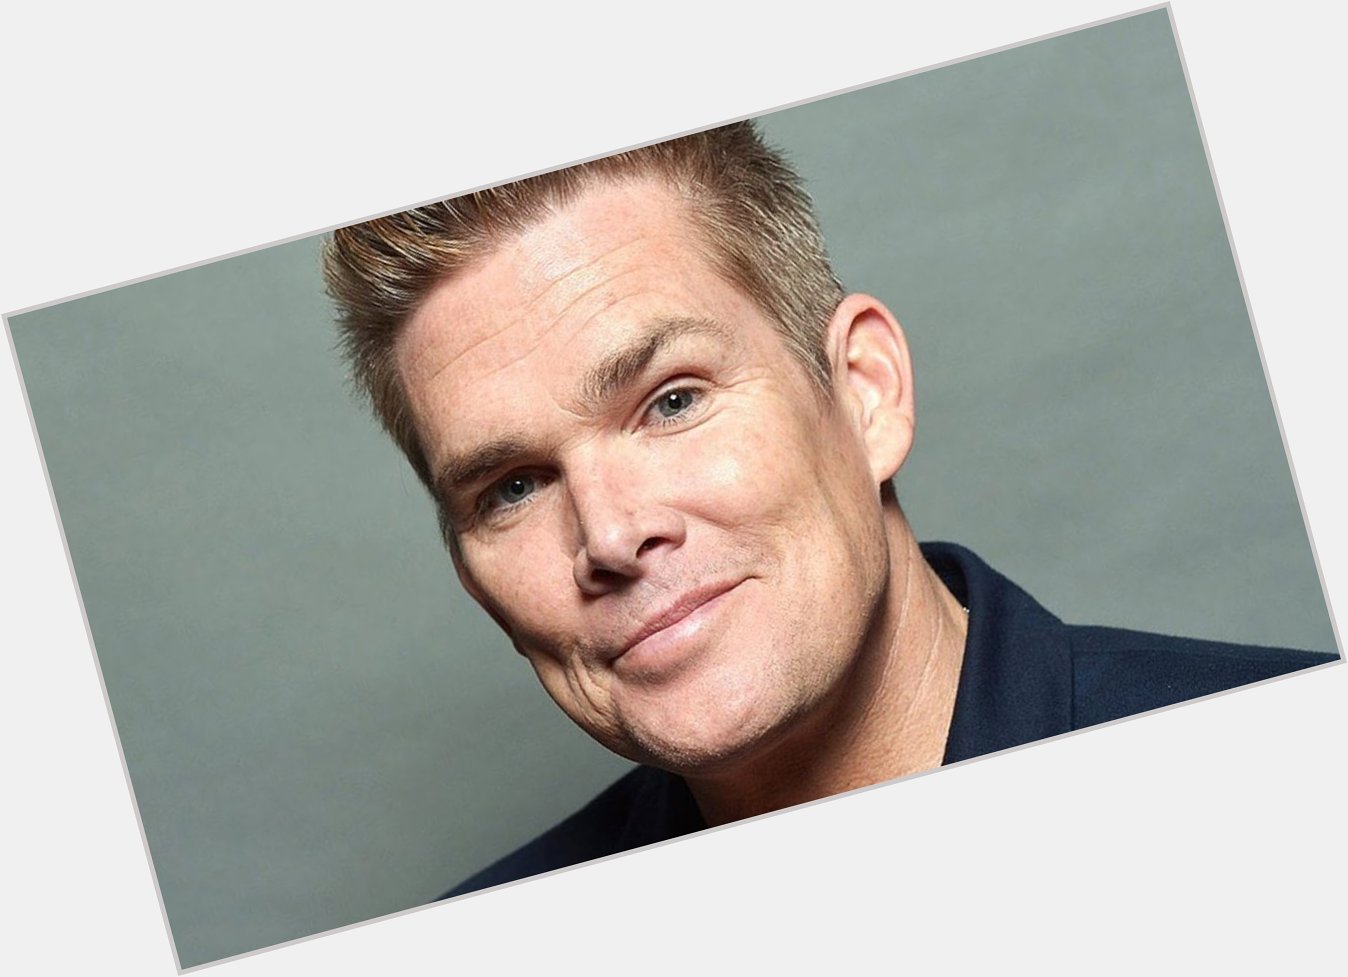 Happy 50th birthday to Mark McGrath from Sugar Ray today! 